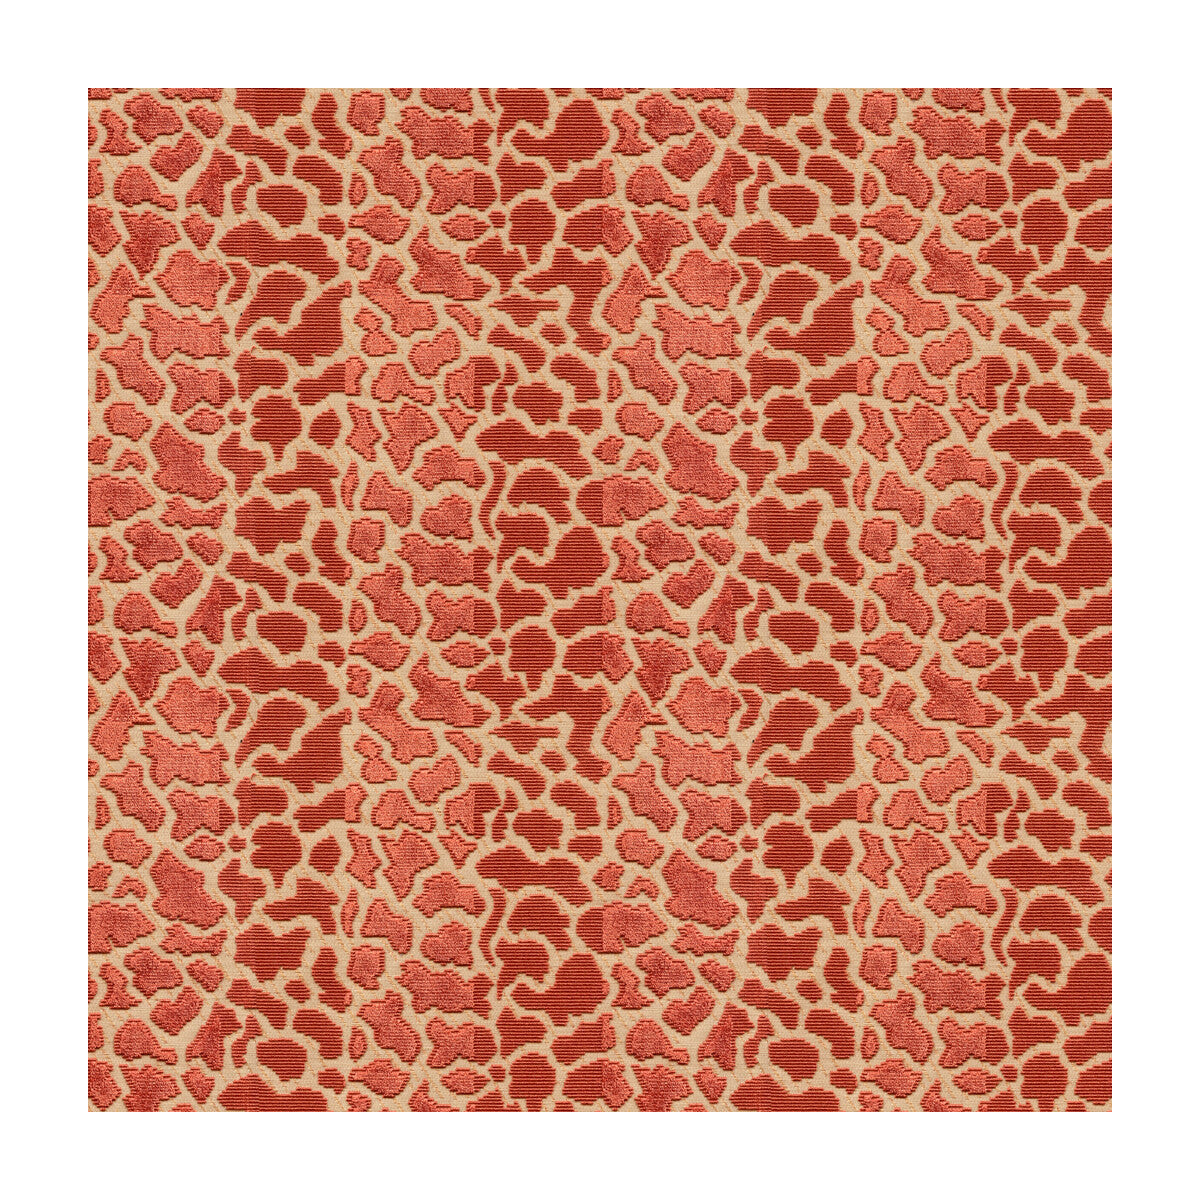 Timbuktu Velvet fabric in red color - pattern 2015120.19.0 - by Lee Jofa in the Parish-Hadley collection